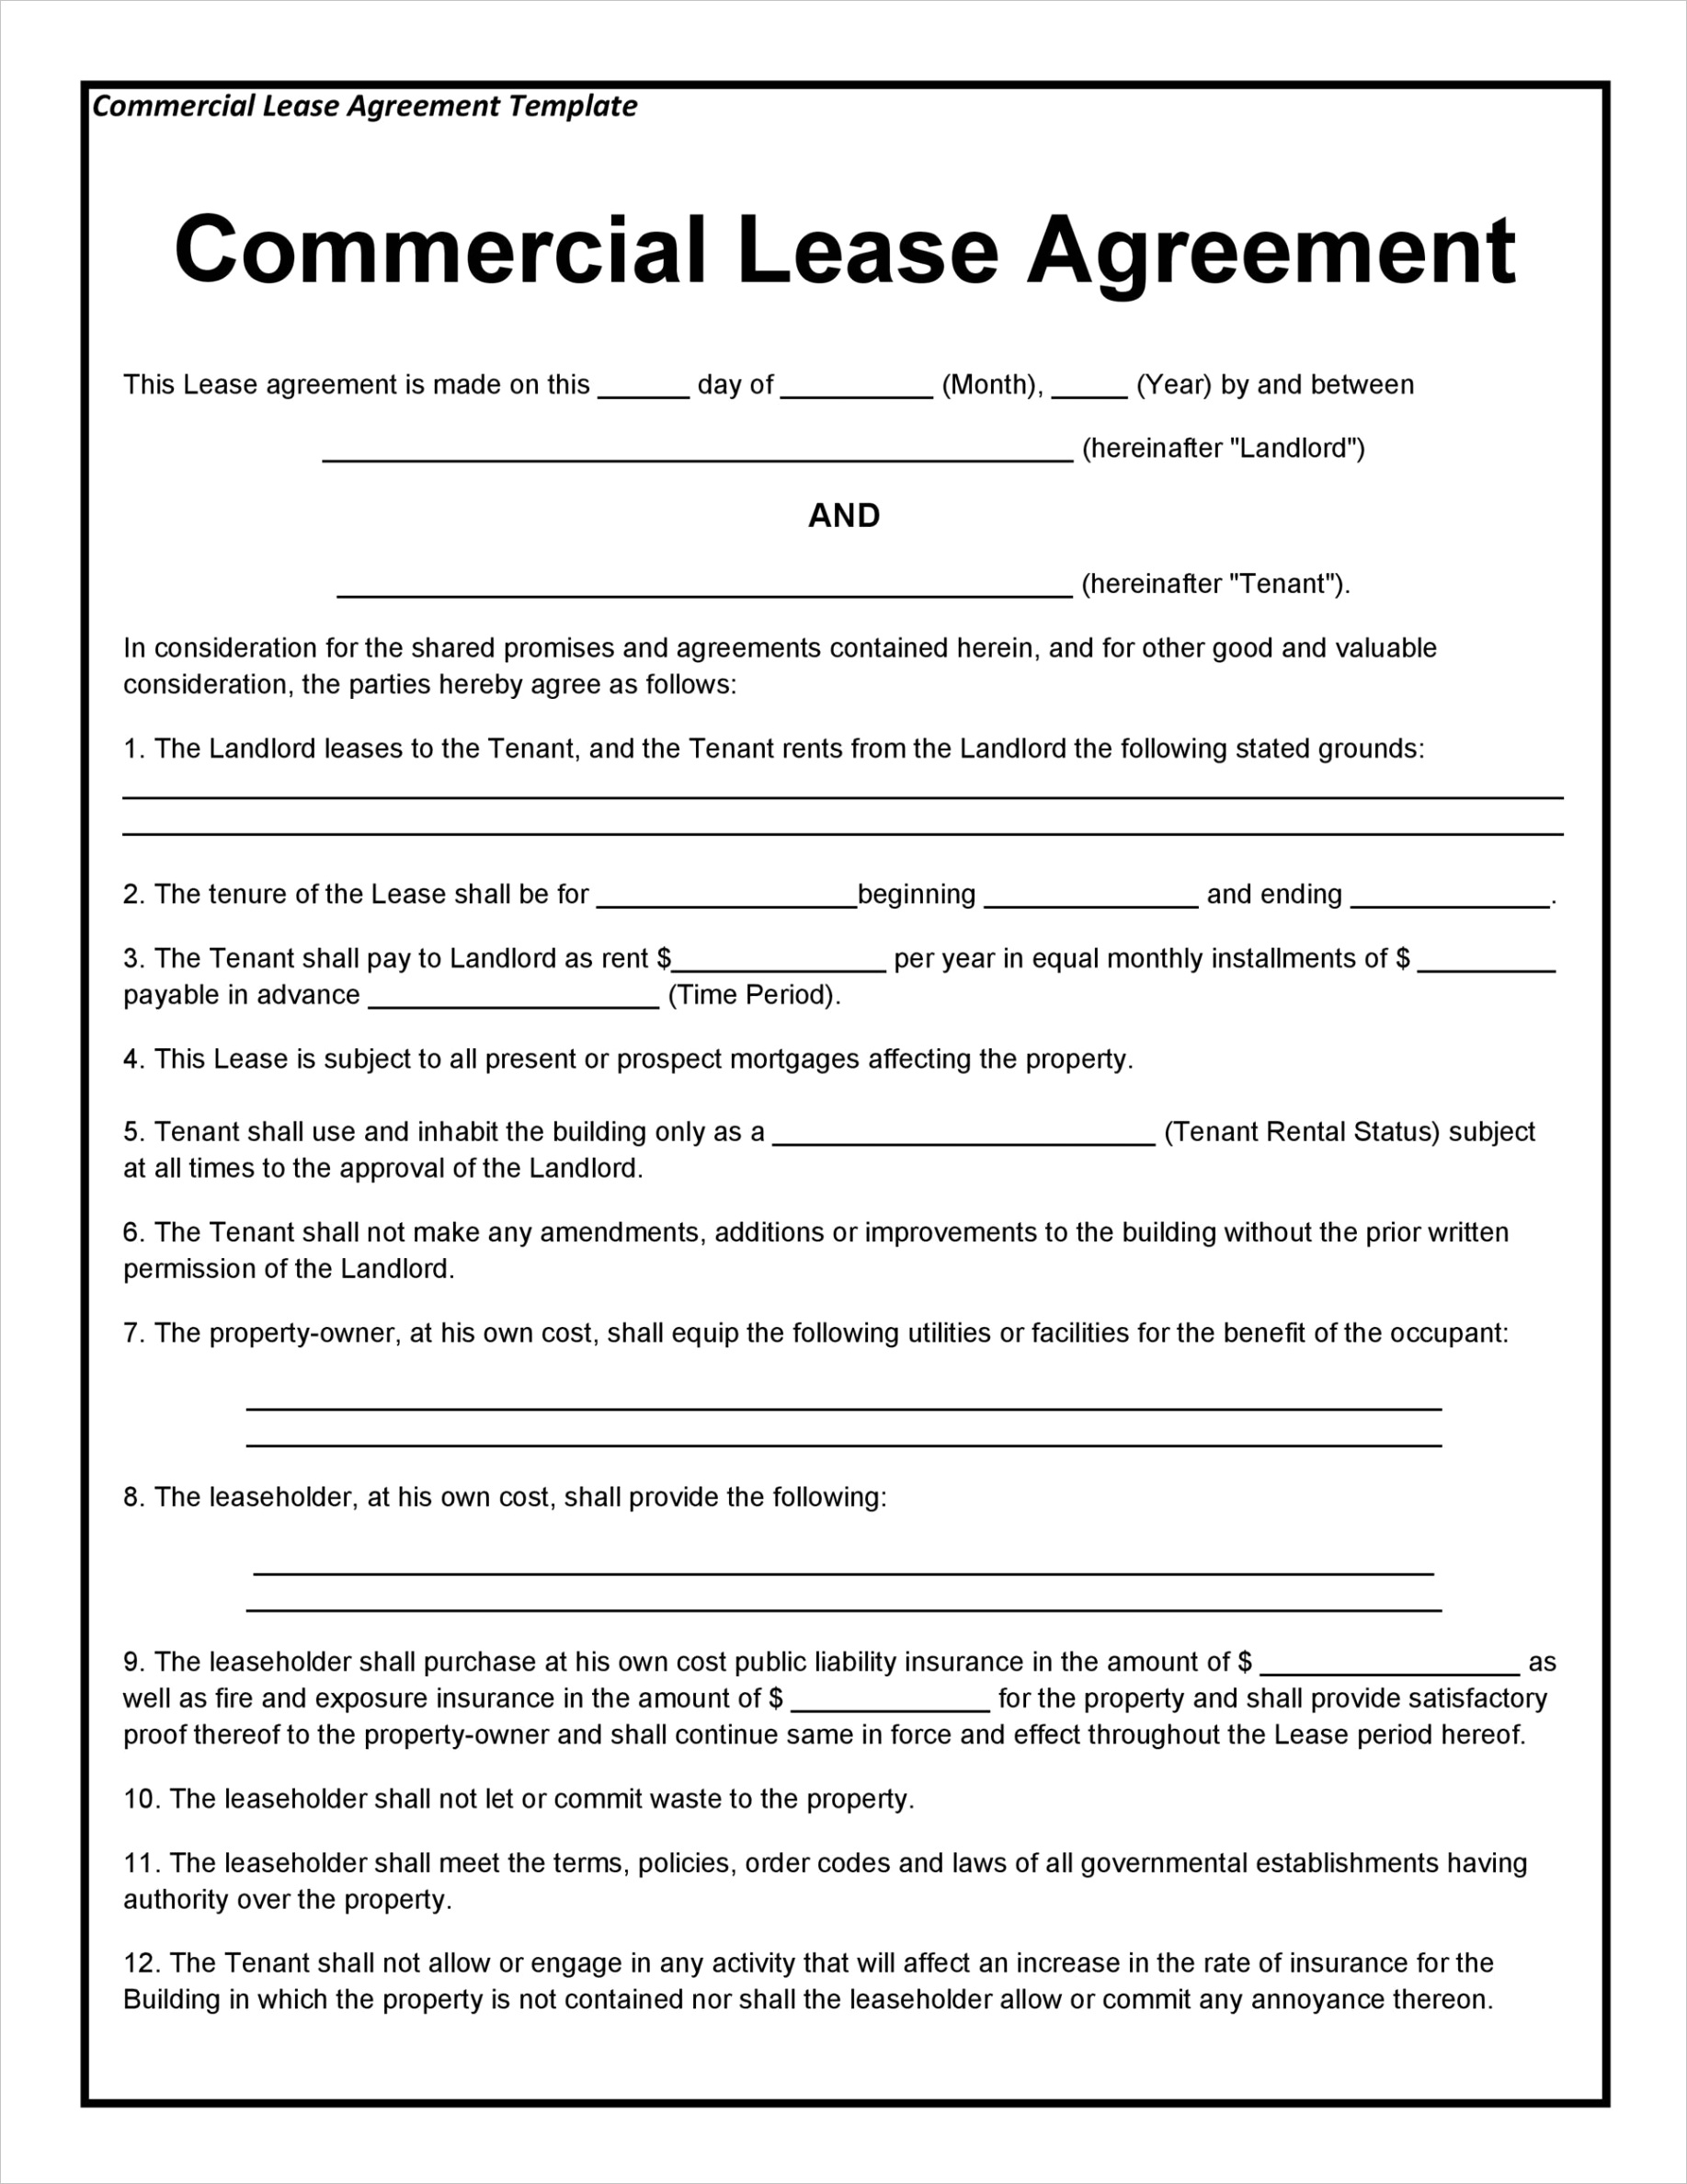 mercial lease agreement